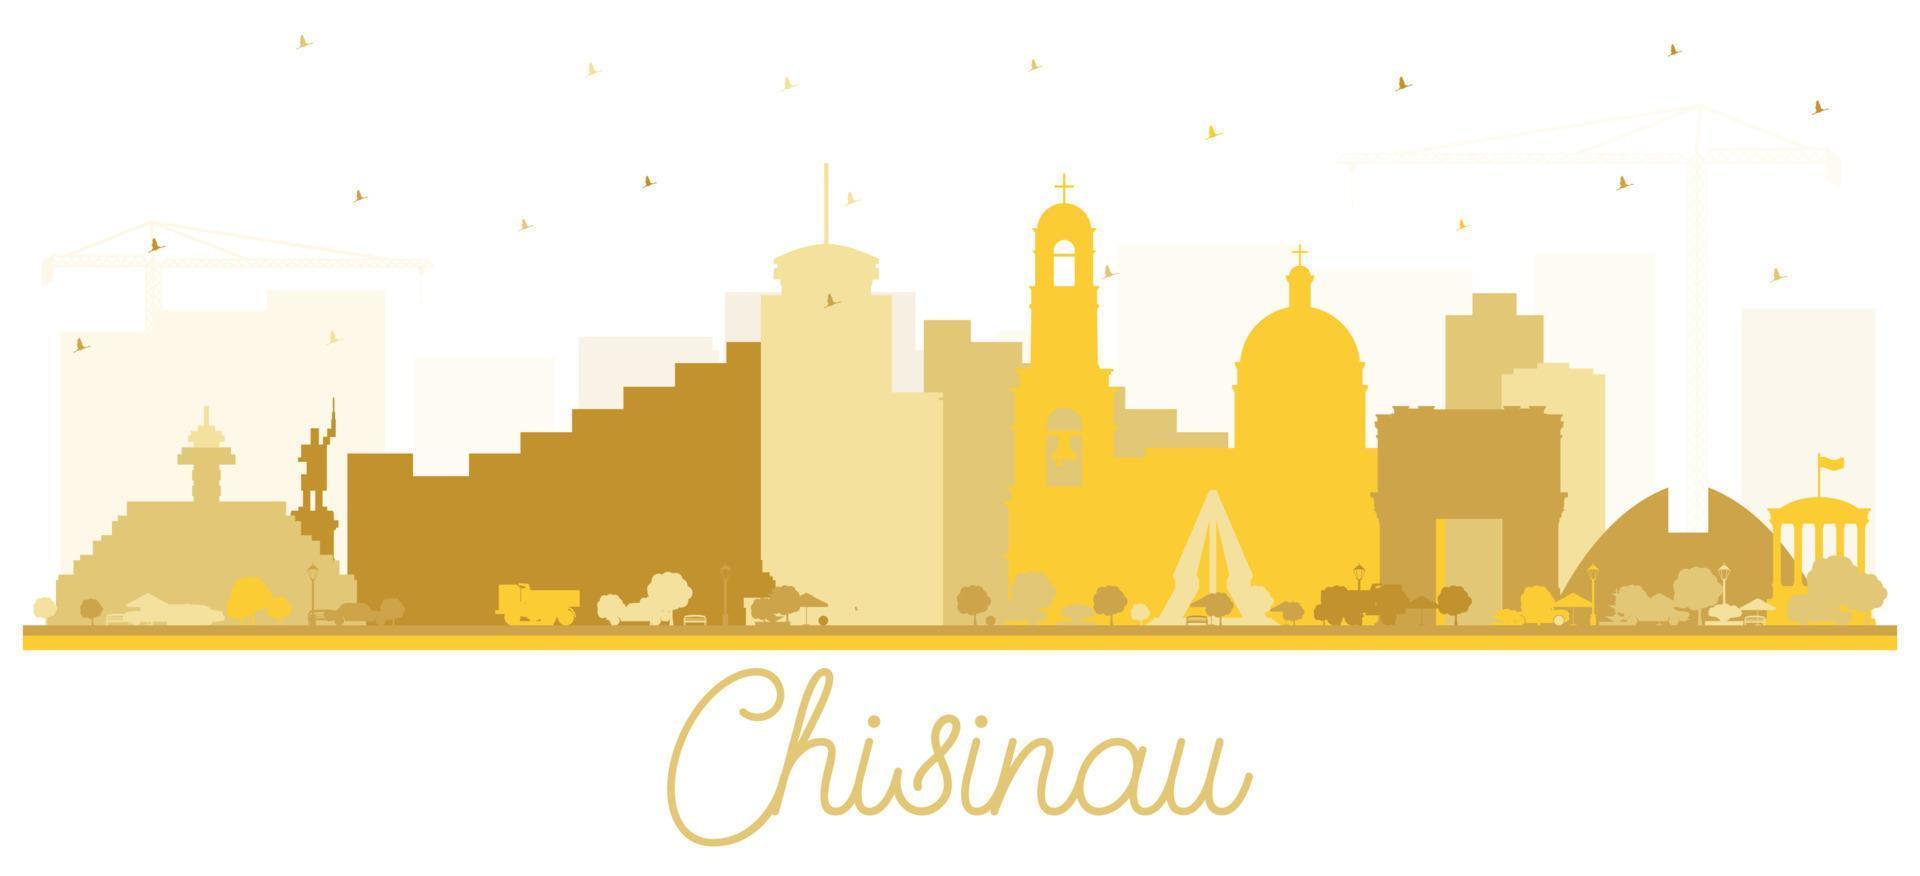 Chisinau Moldova City Skyline Silhouette with Golden Buildings Isolated on White. vector